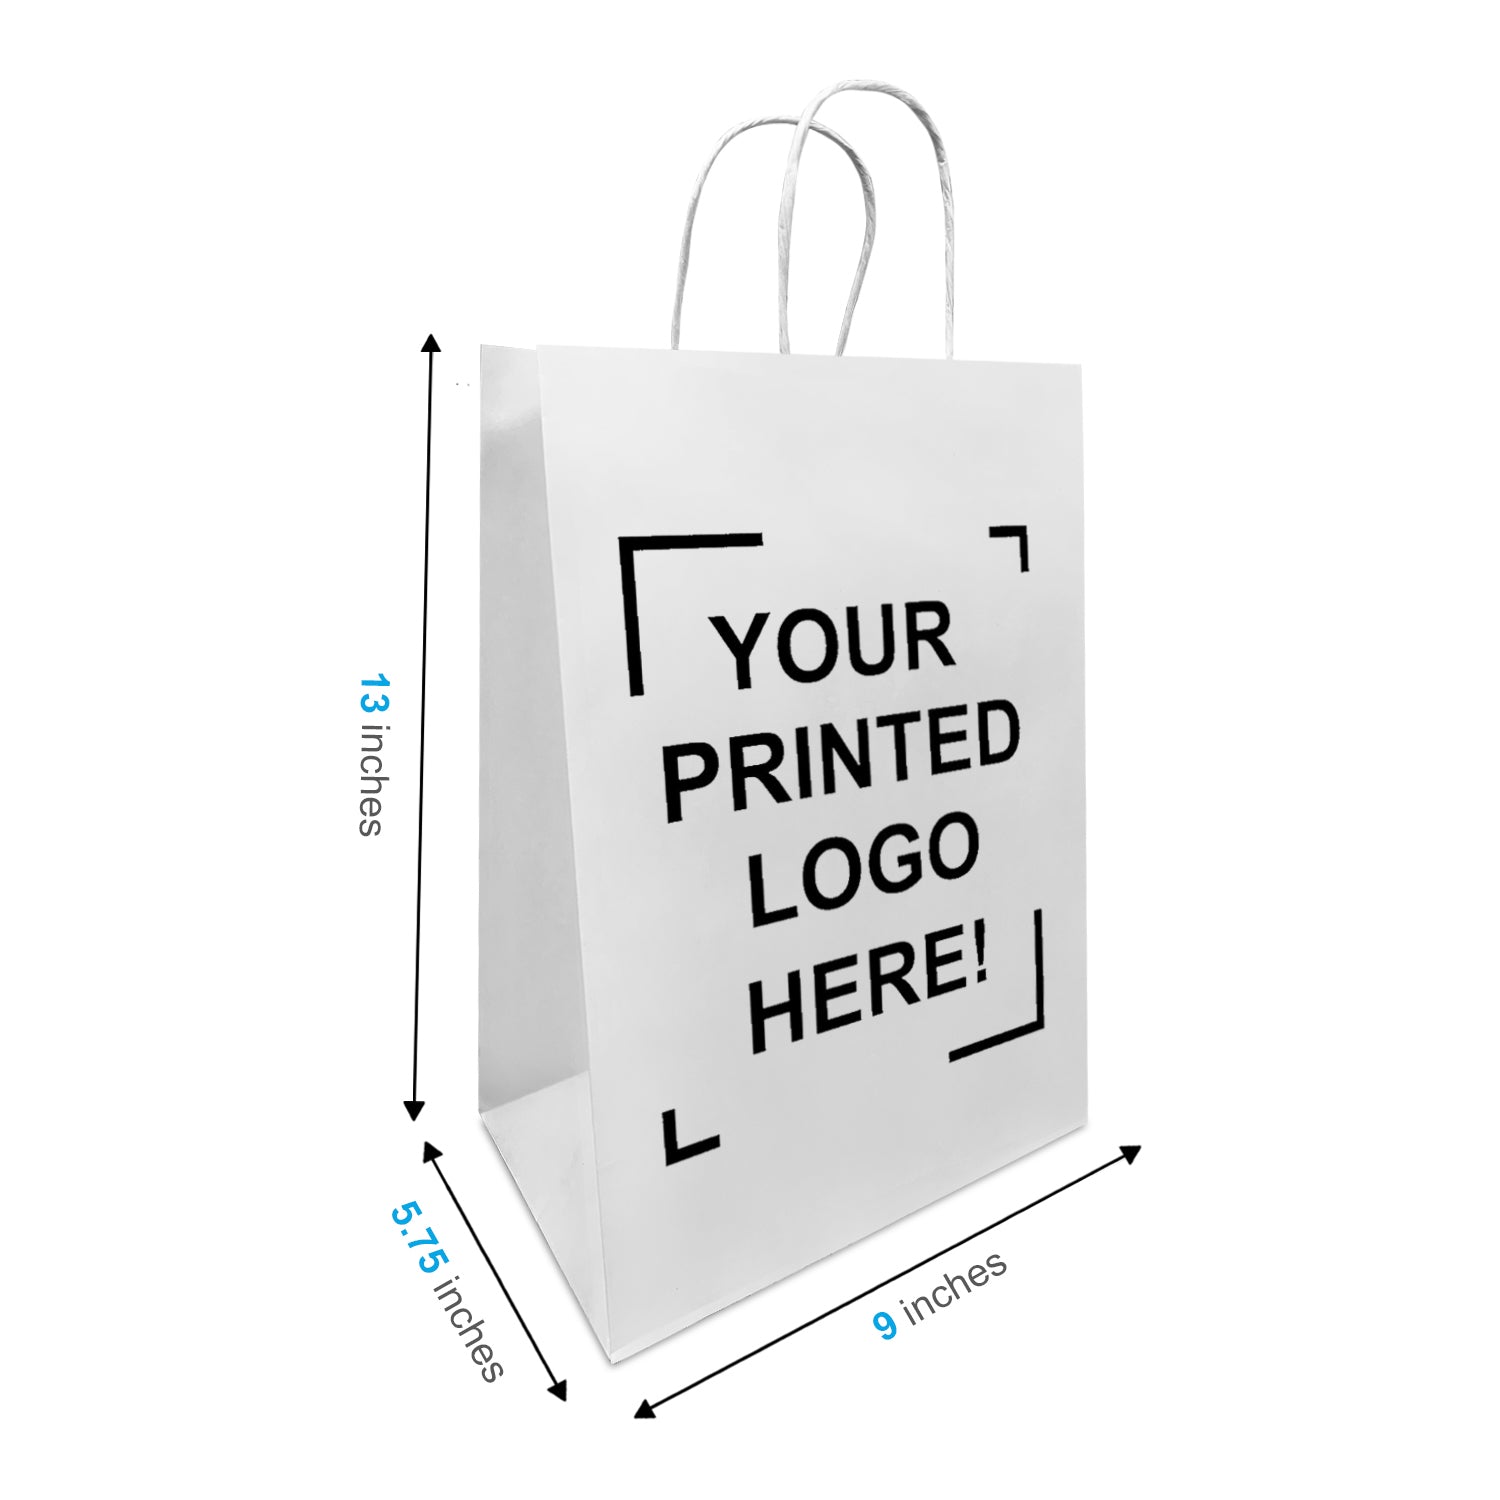 200pcs, Double Wine 9x5.75x13 inches White Paper Bags Twist Handles, Full  Color Print, Printed in Canada